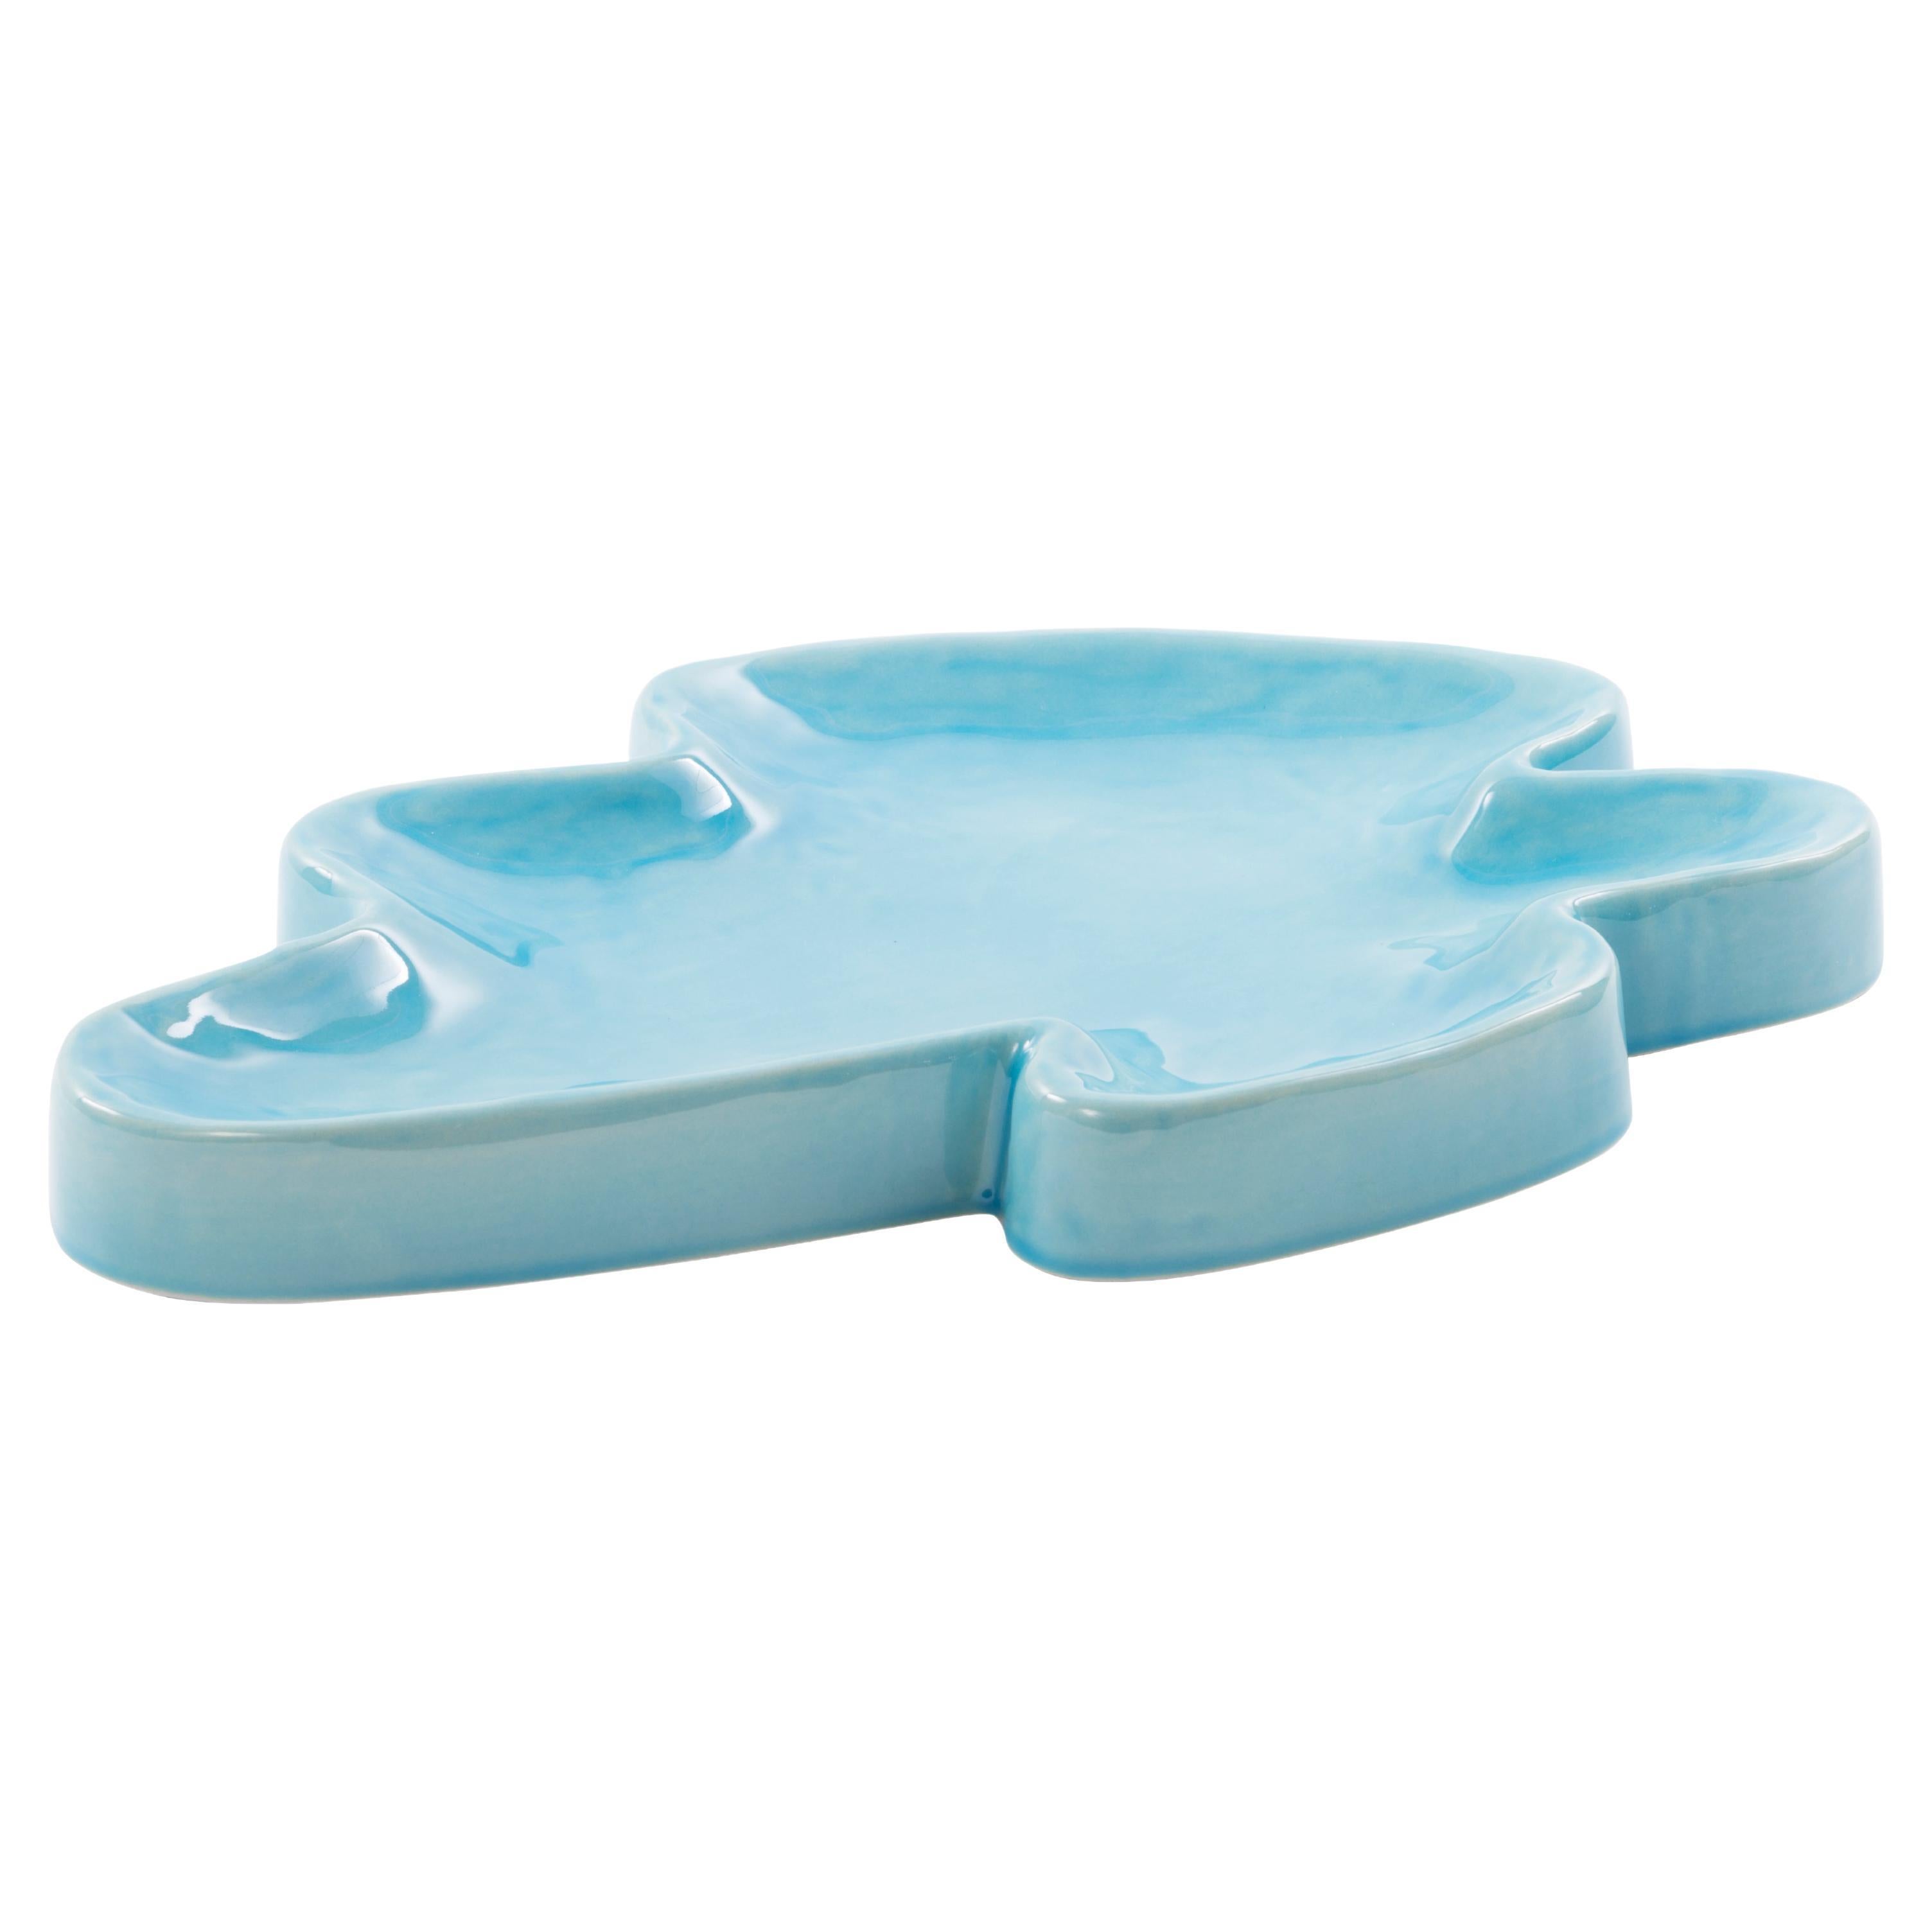 Lake Big Tropical Turquoise Tray by Pulpo